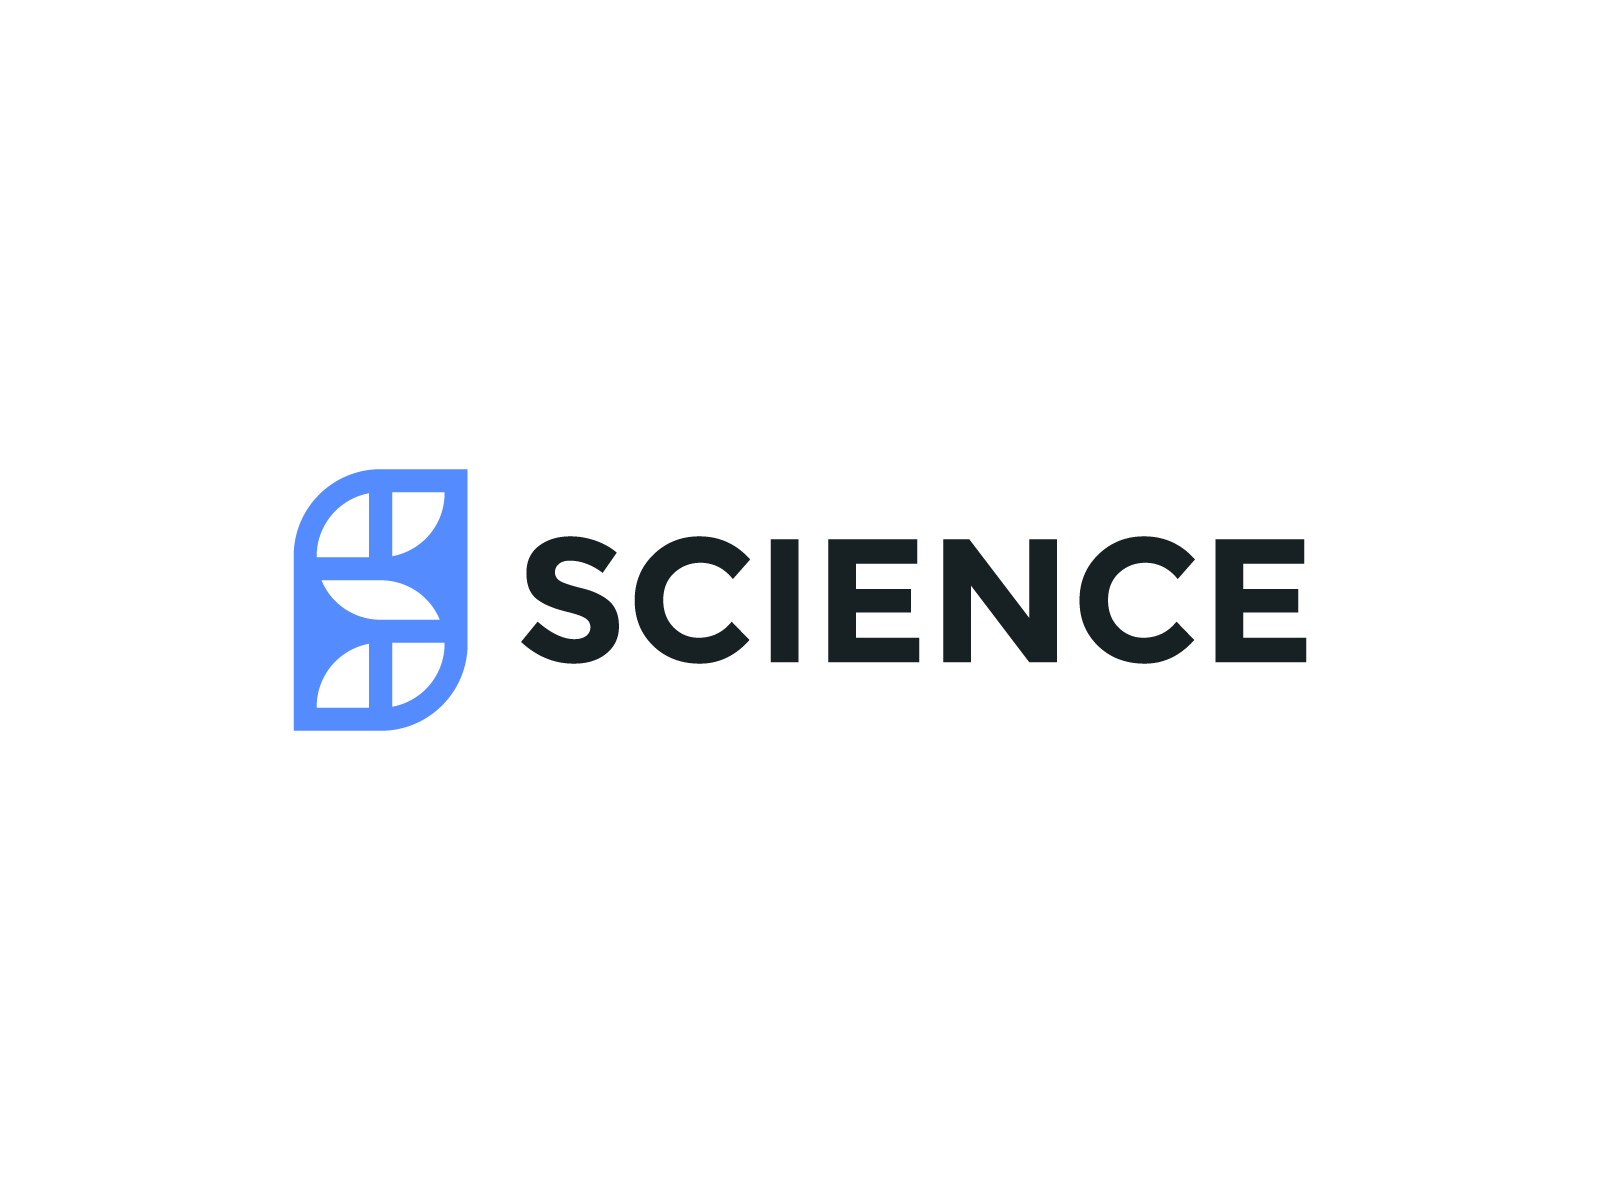 science by Muhammad Aslam on Dribbble